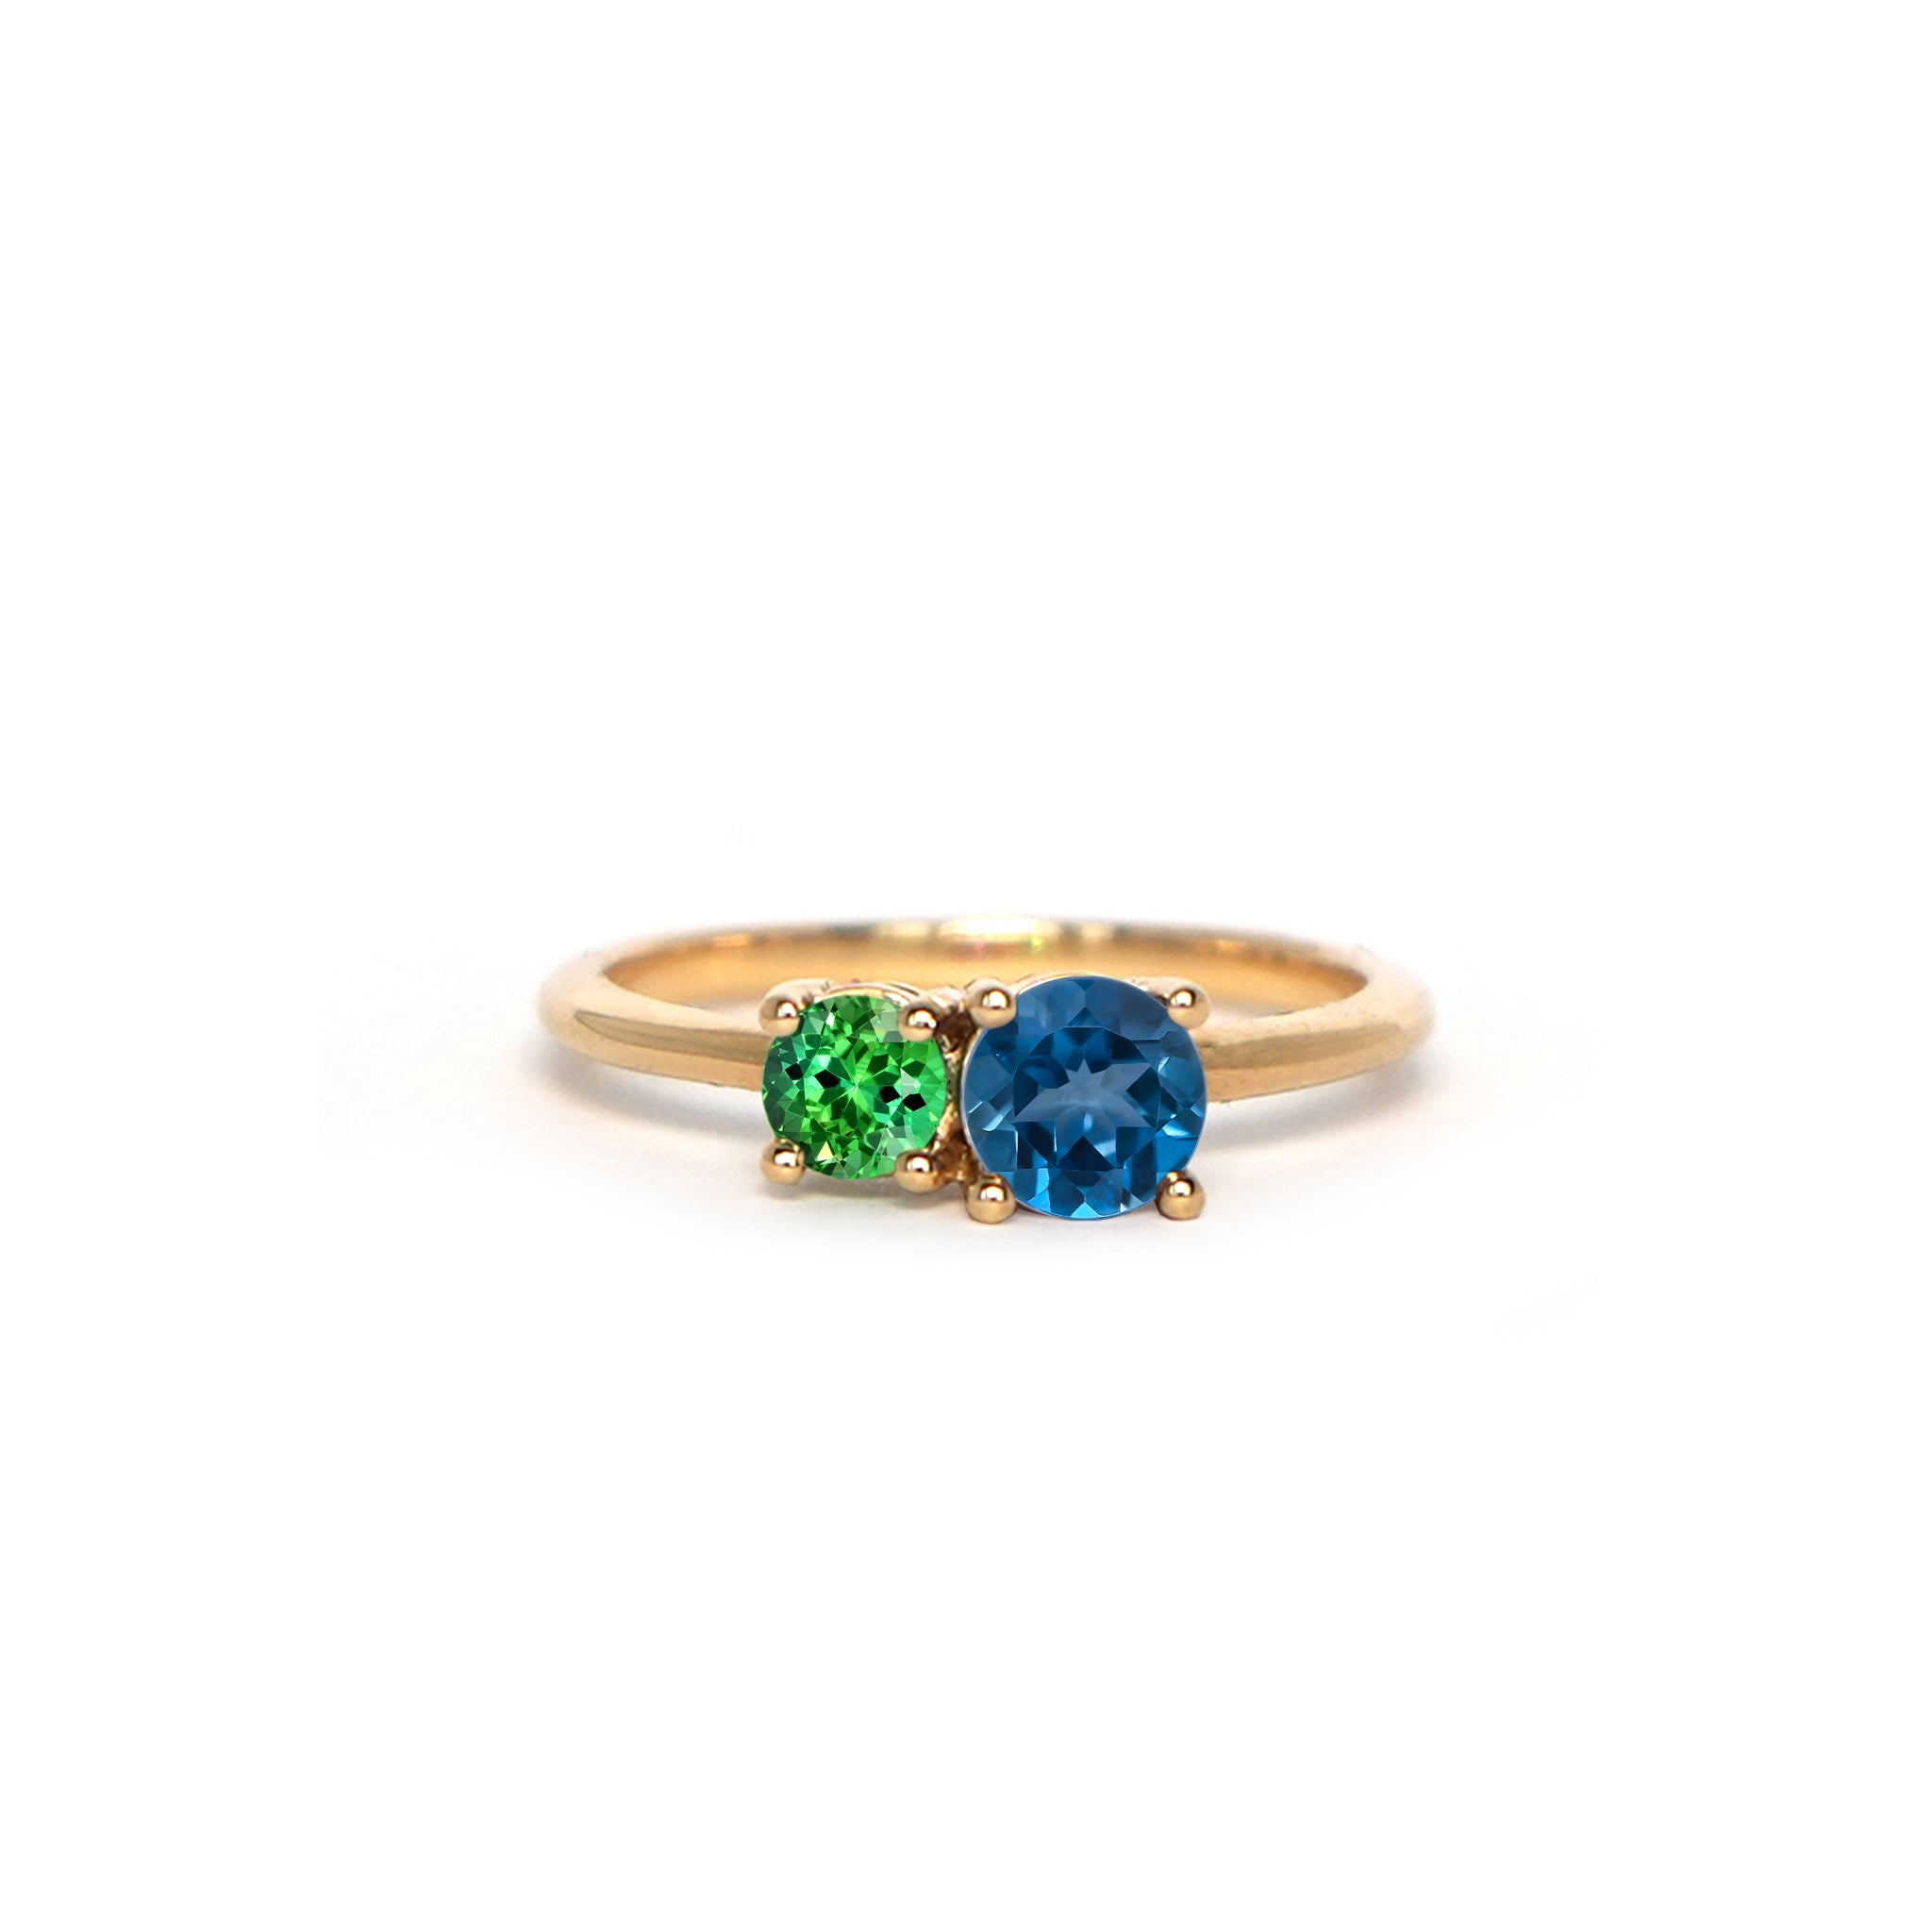 London lime ring in solid 14k yellow gold with genuine London blue topaz and chrome tourmaline